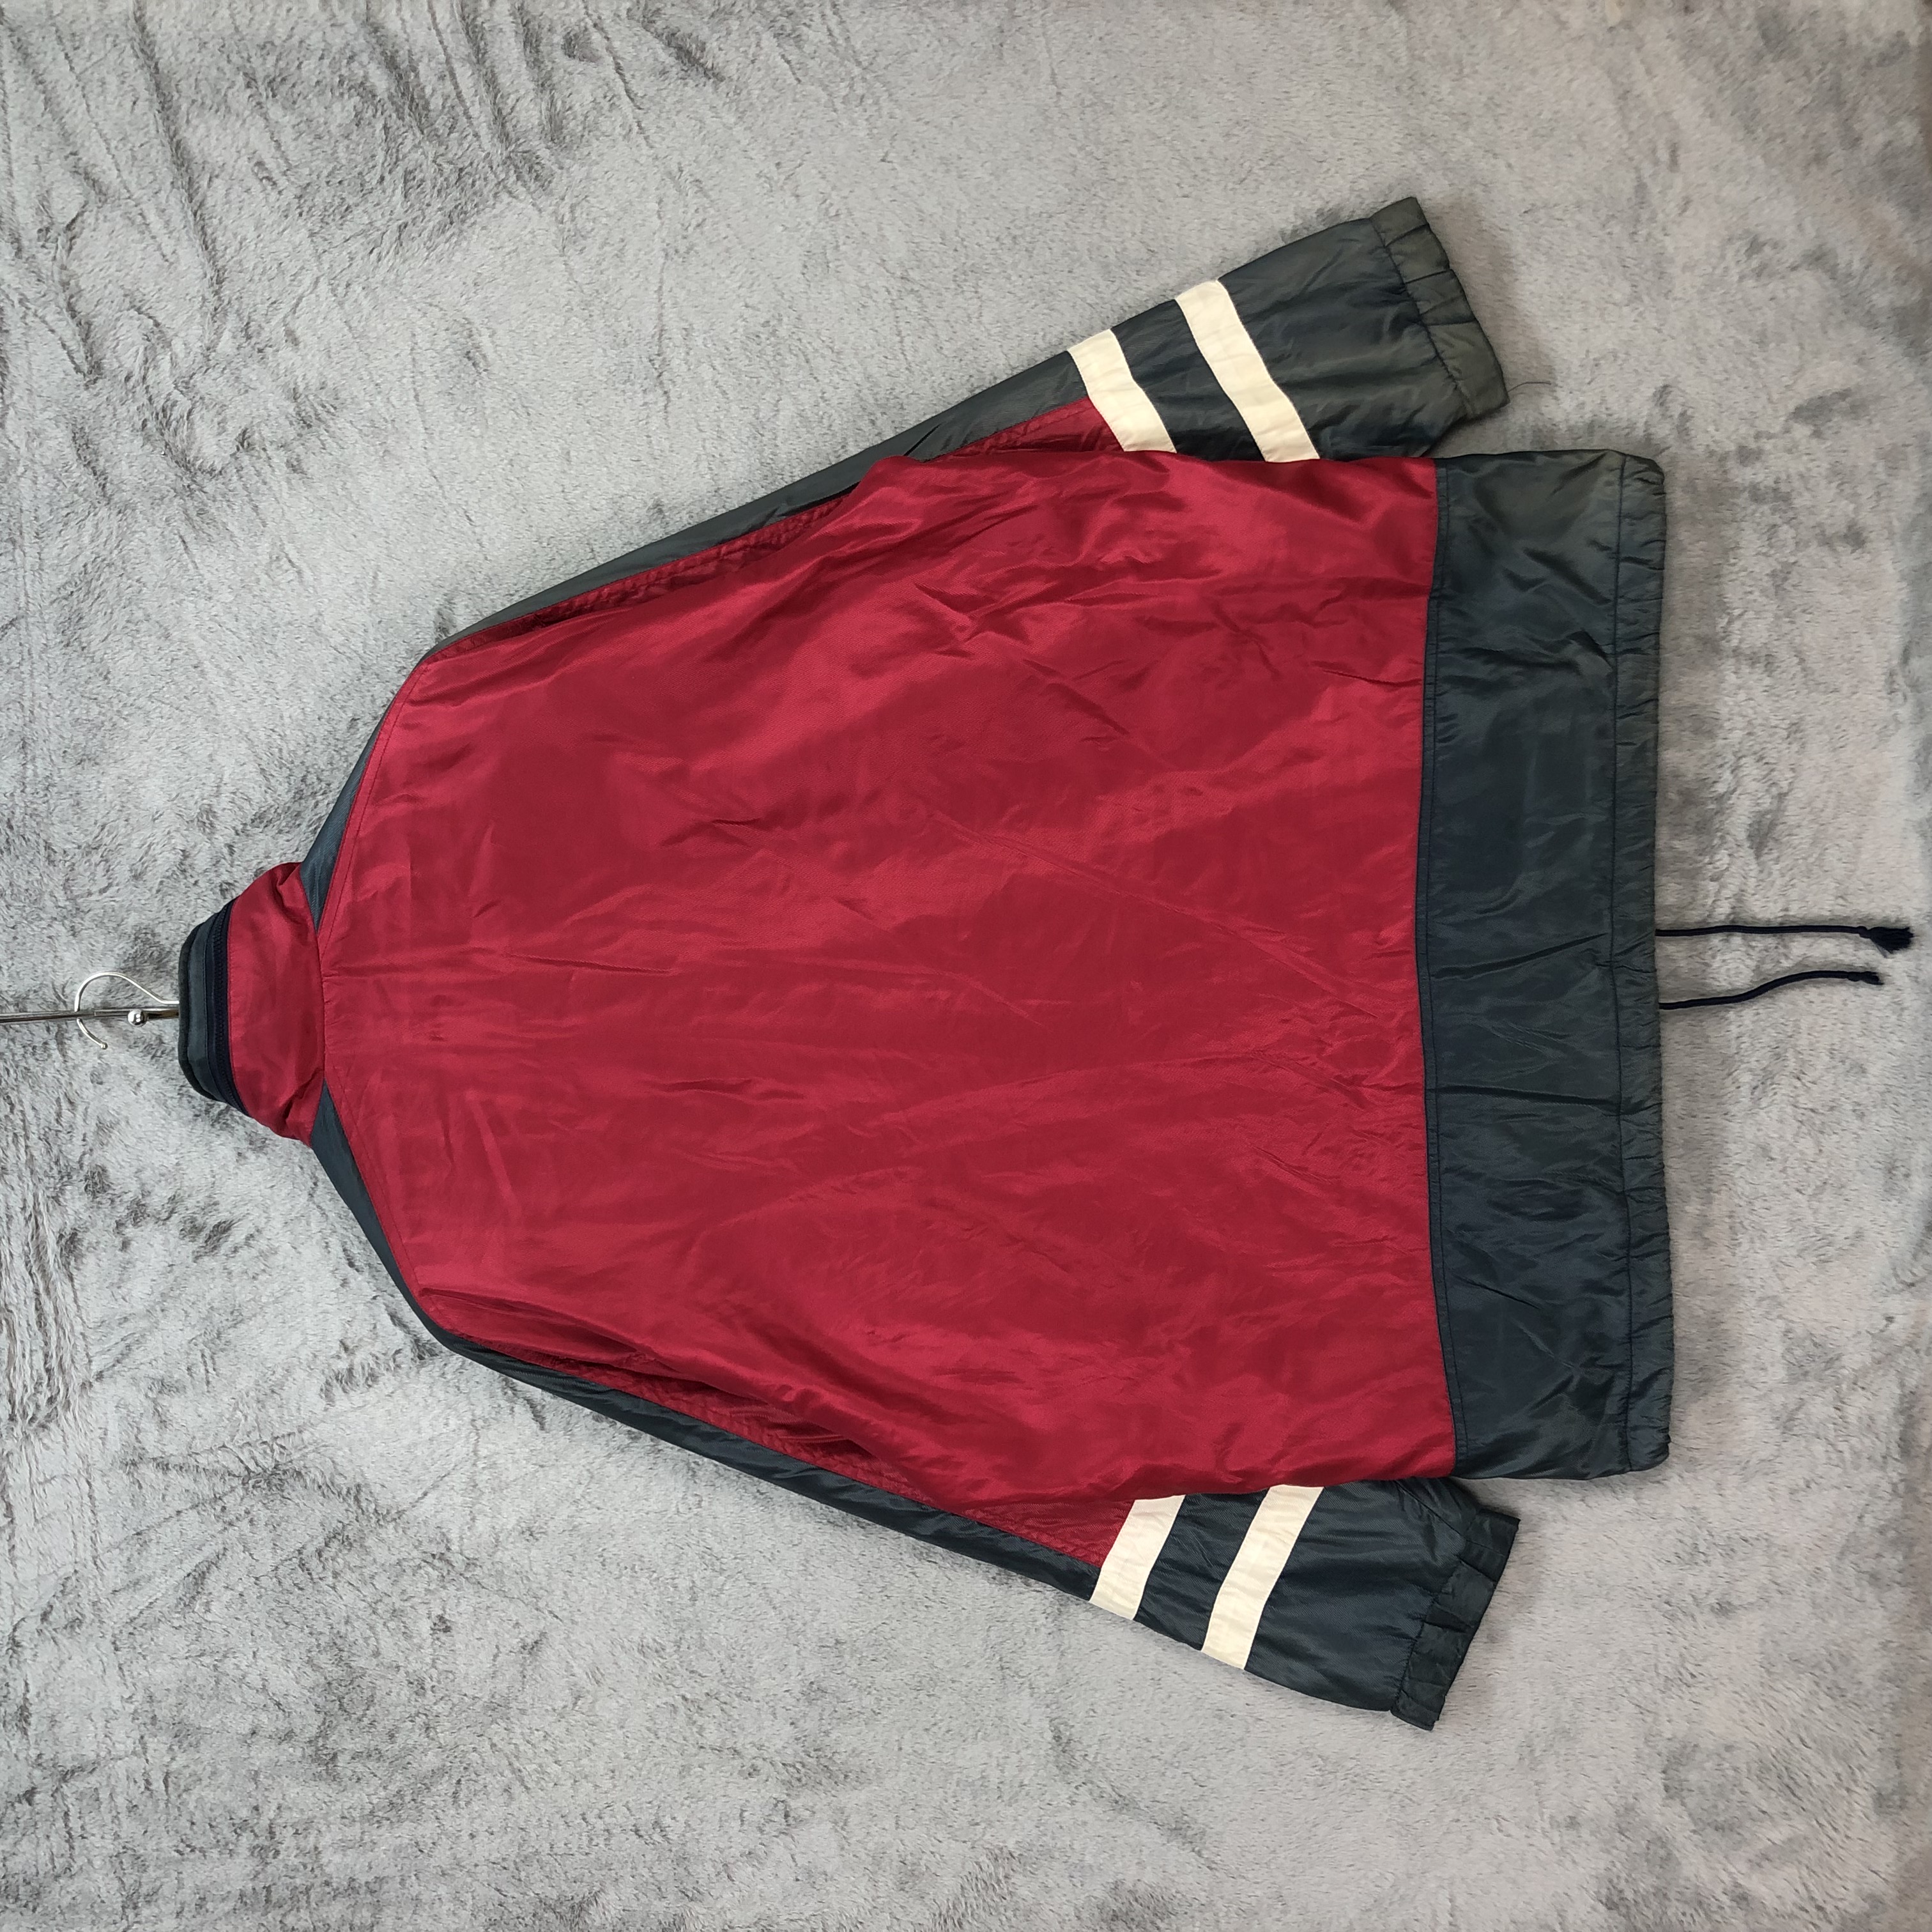 VINTAGE NEW BALANCE JACKET BORN IN THE USA #5568-198 - 10